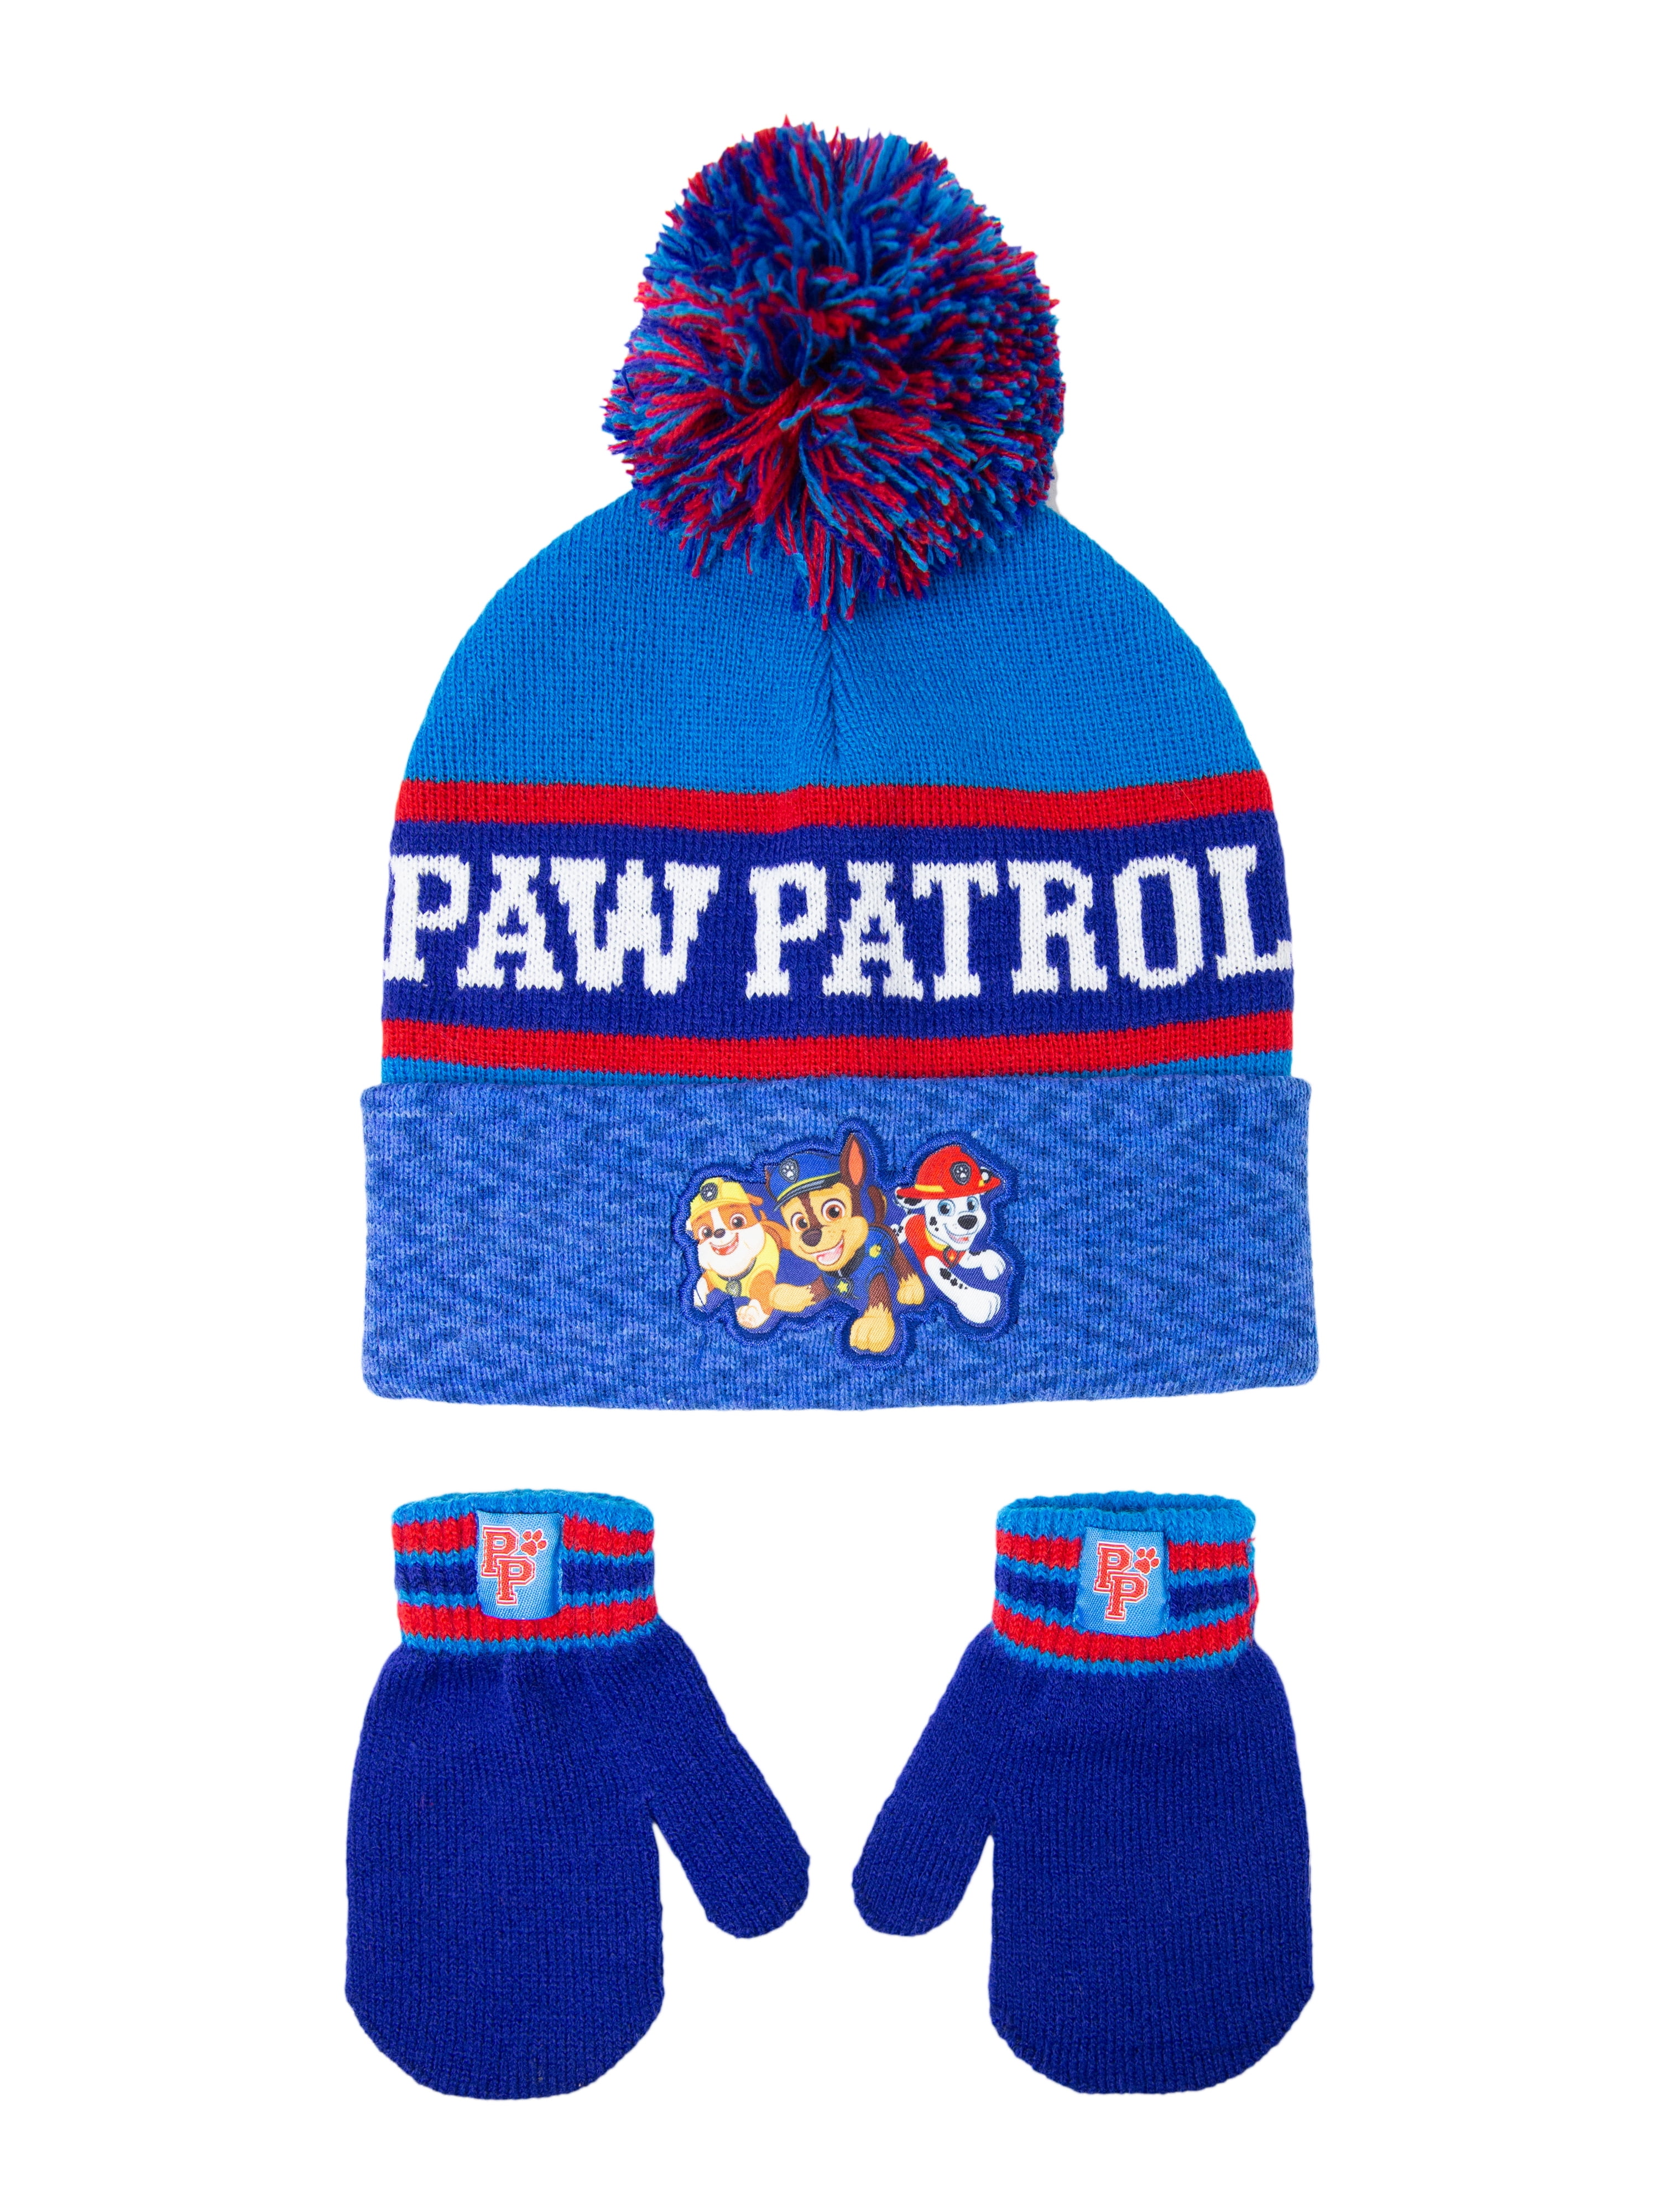 NEW Boys Paw Patrol Ready For Action Winter Hat Bobble Hat 3 to 8 years Gift 